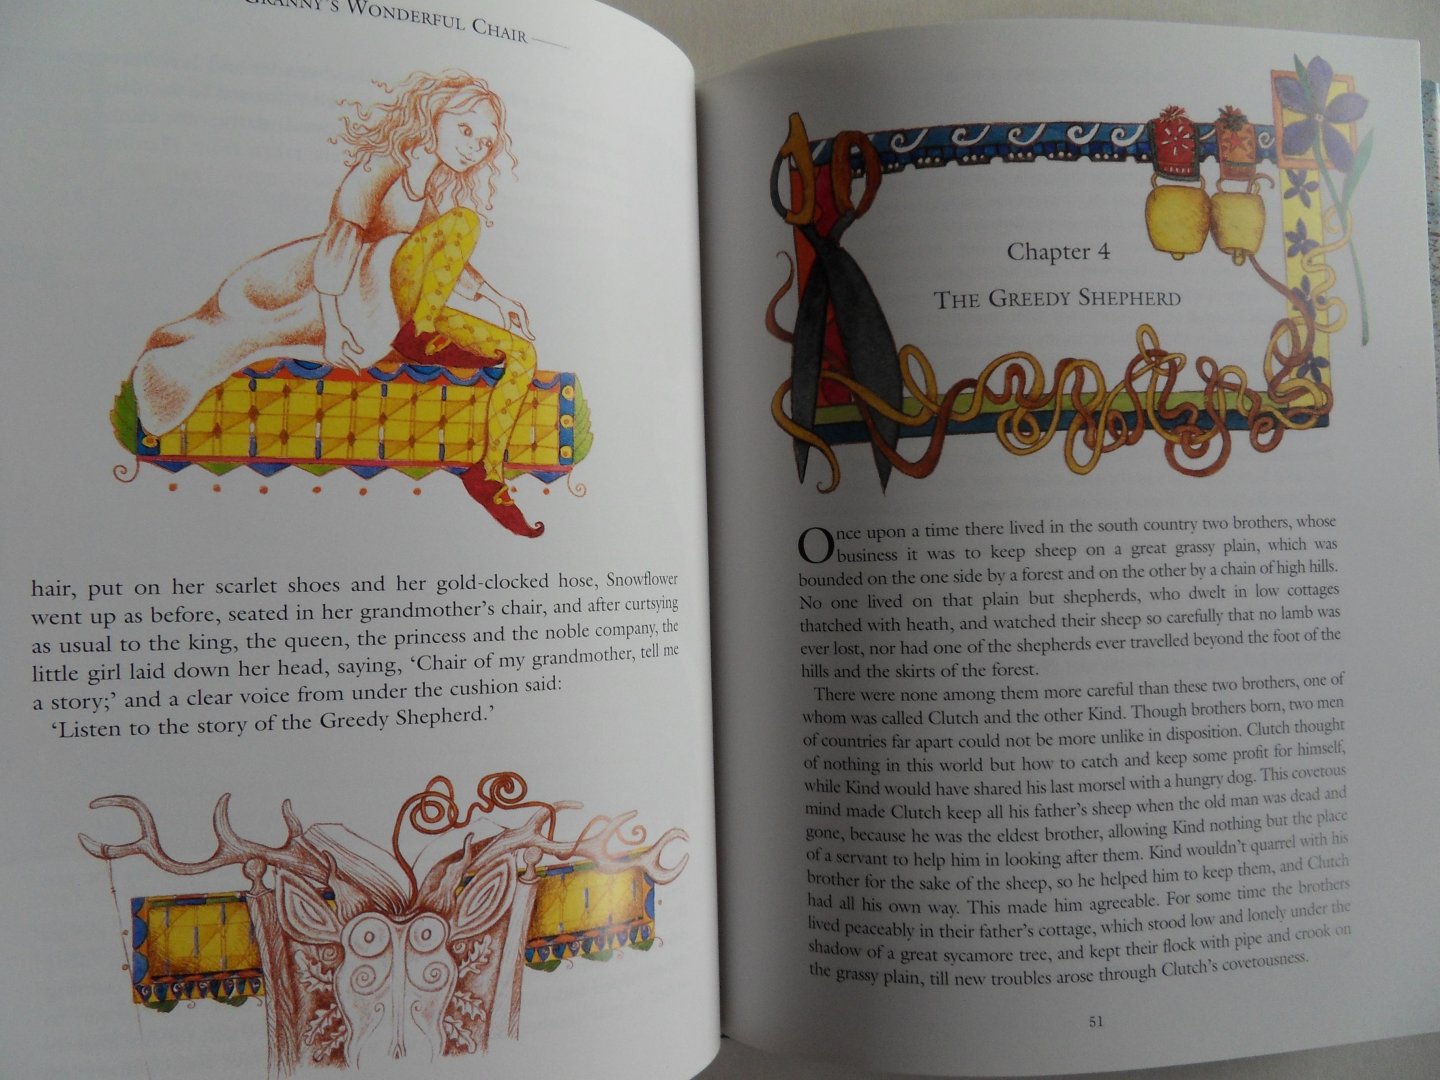 Browne, Frances. [ With a introduction by Frances Hodgson Burnett ]. - Granny's Wonderful Chair. [ Fairy Tales / Sprookjes ]. - illustrated by Gisèle Rime.